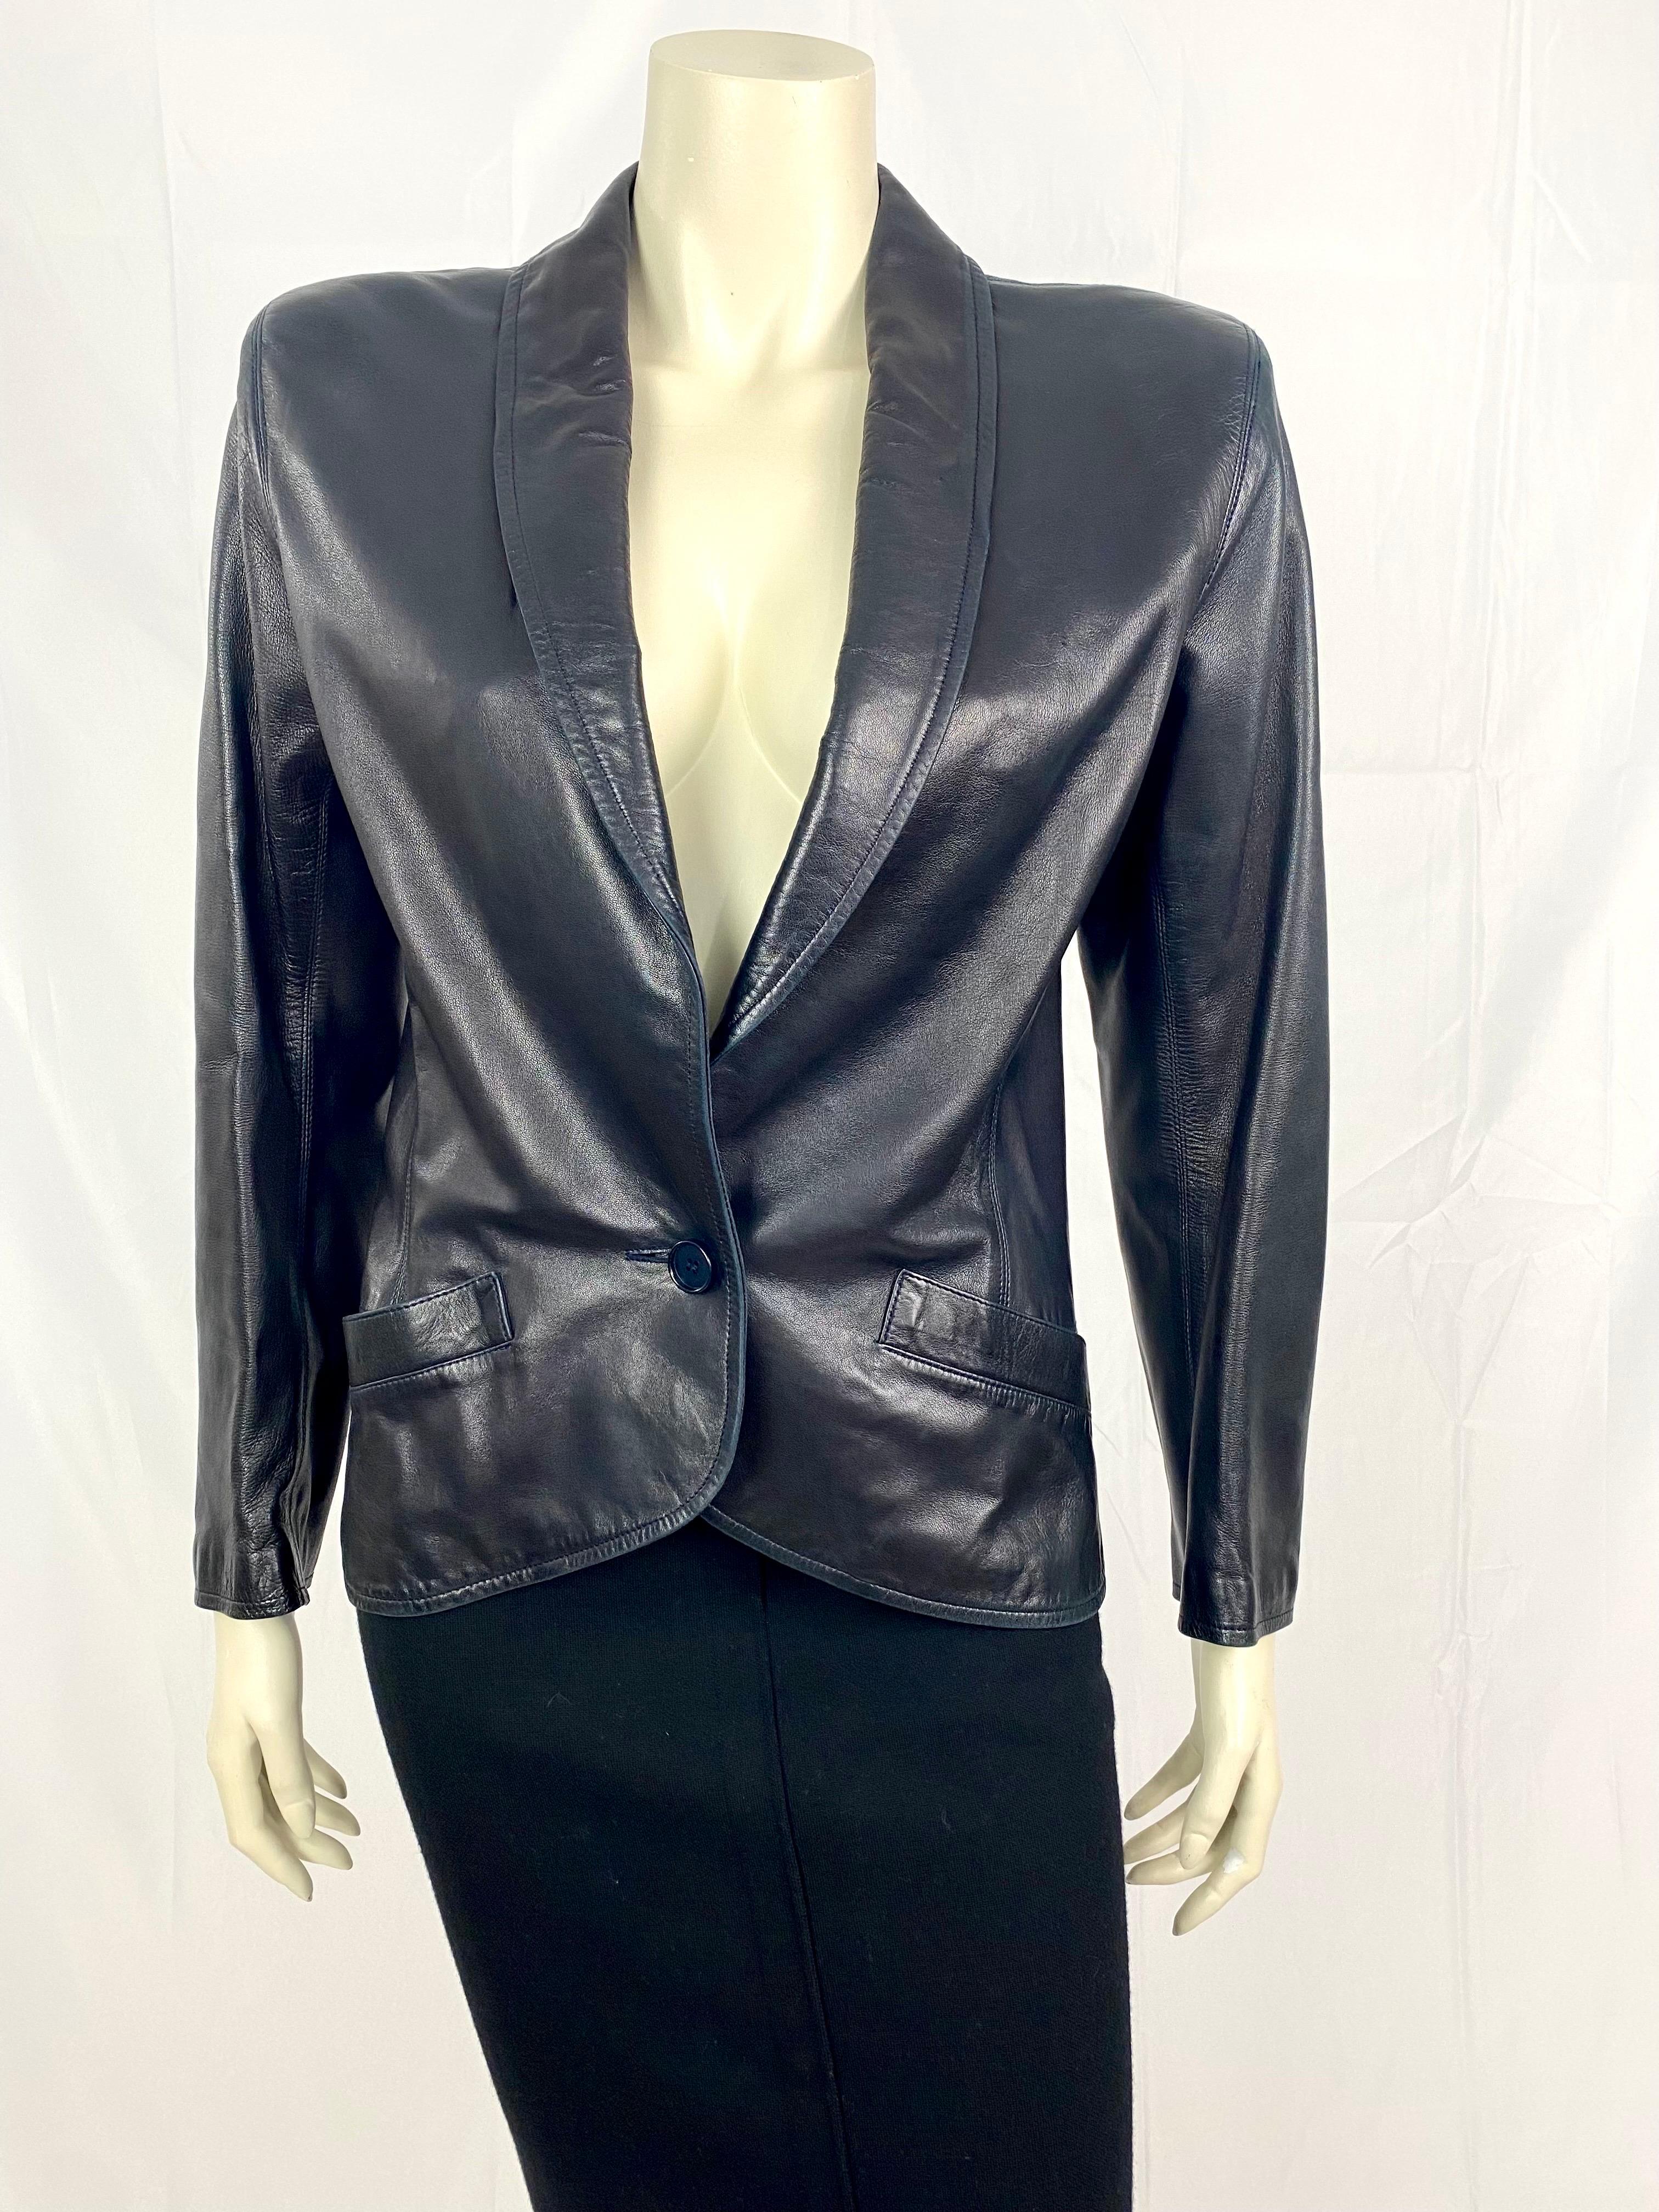 Vintage navy blue lambskin leather blazer by Yves Saint Laurent Rive Gauche from the 1970s.
Slightly fitted, nice long and thin collar.
closes with a single button.
raglan pockets.
Size 42
Shoulders 44cm
Chest width 50cm
Size 44cm
Hips 46cm
Length